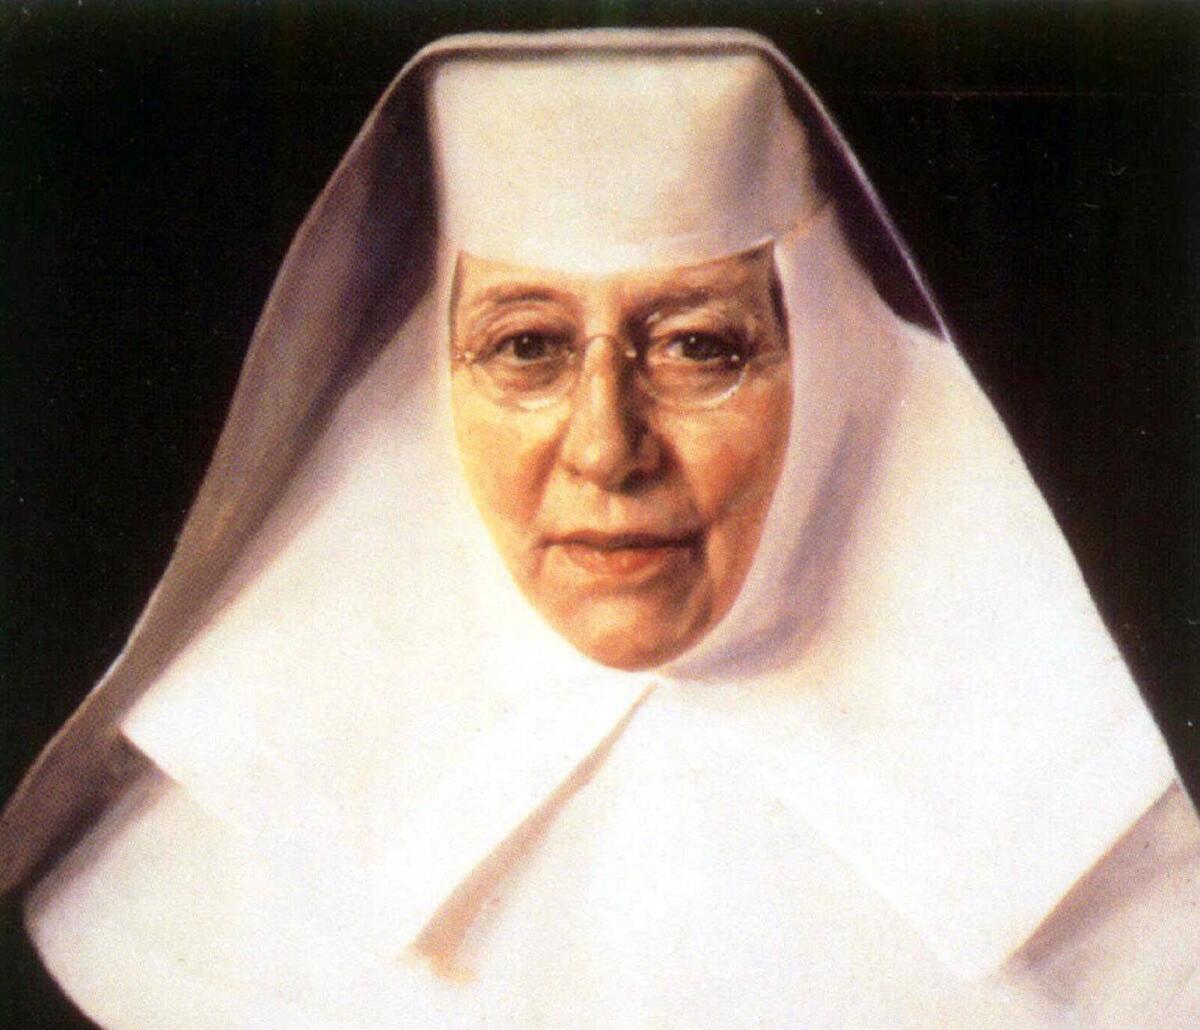 A painting of Blessed Katherine Drexel, founder of the Sisters of the Blessed Sacrament order of nuns, is displayed in Bensalem, Pa.